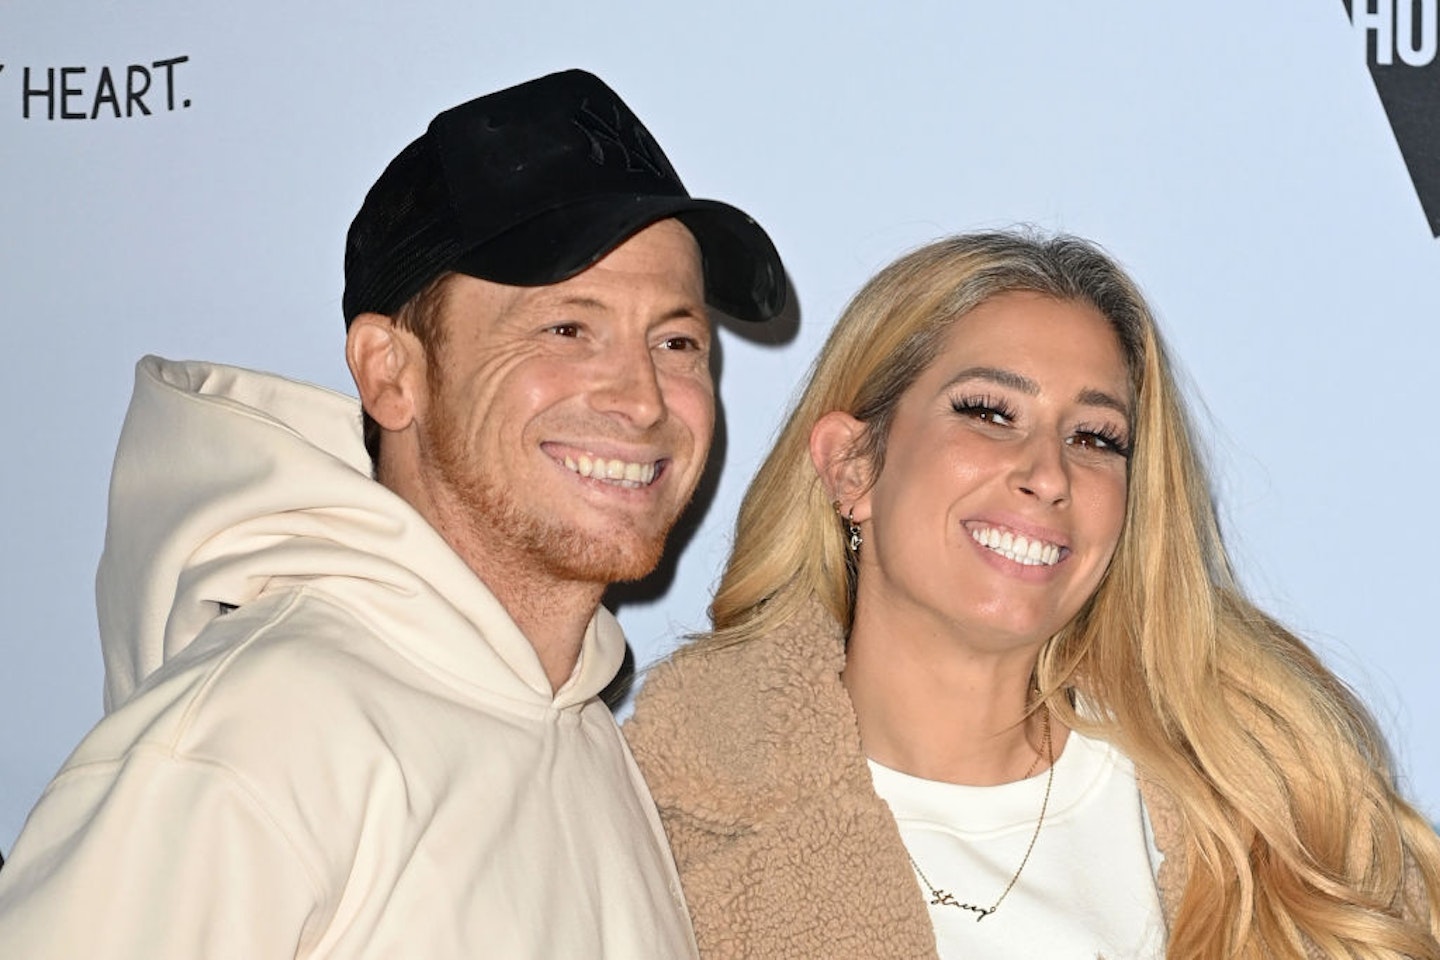 Joe Swash and Stacey Solomon smiling together